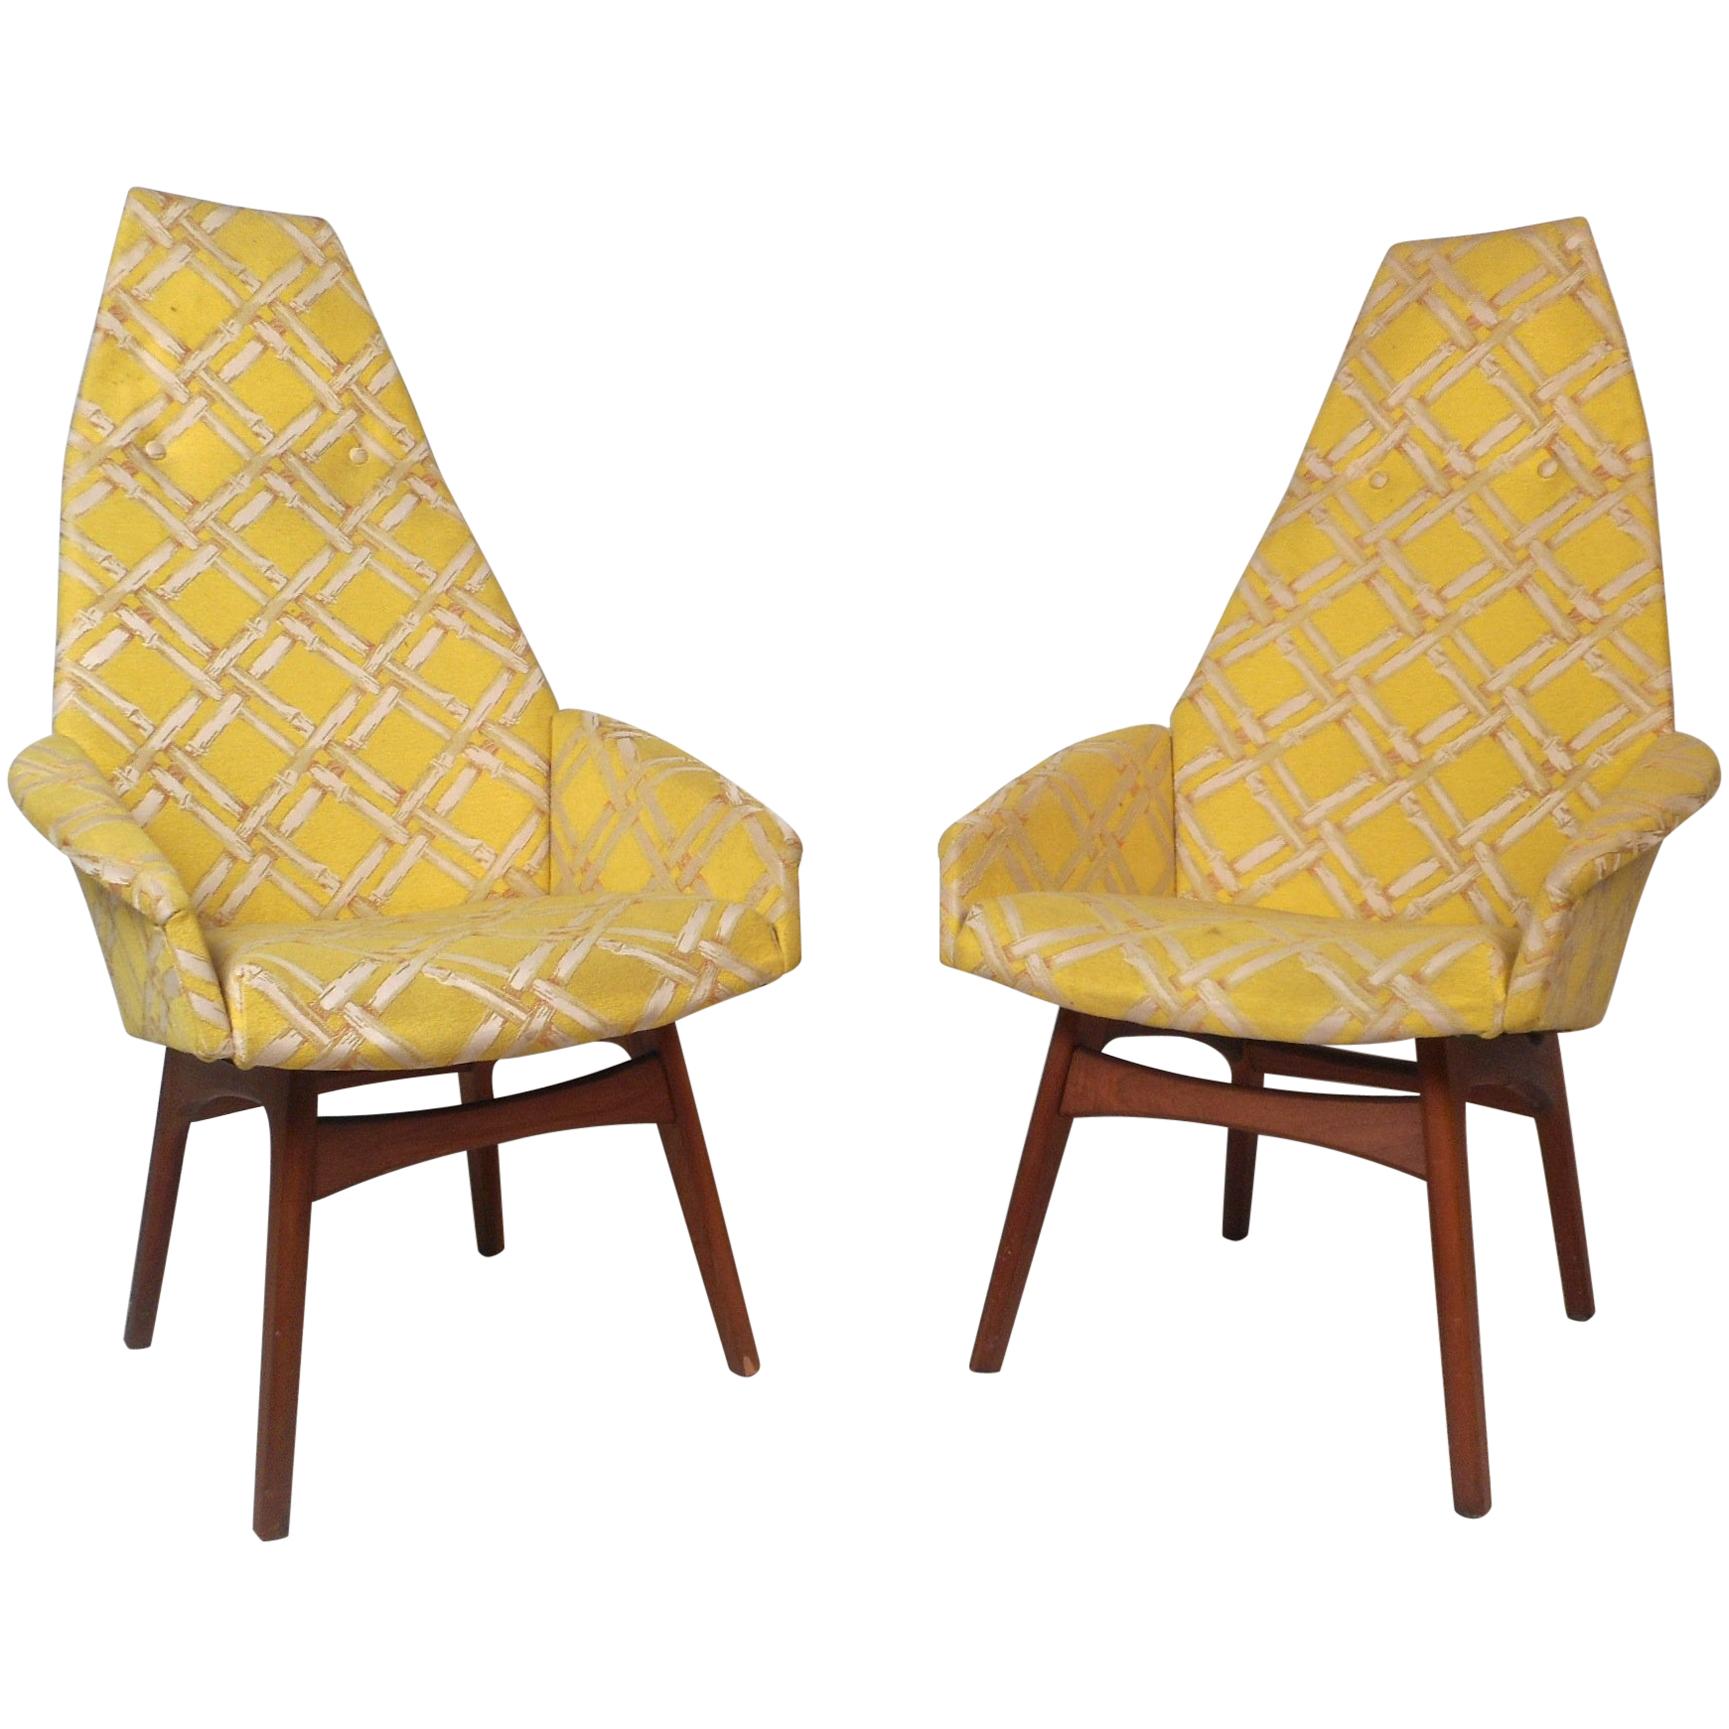 Pair of Mid-Century Modern Adrian Pearsall Style Lounge Chairs